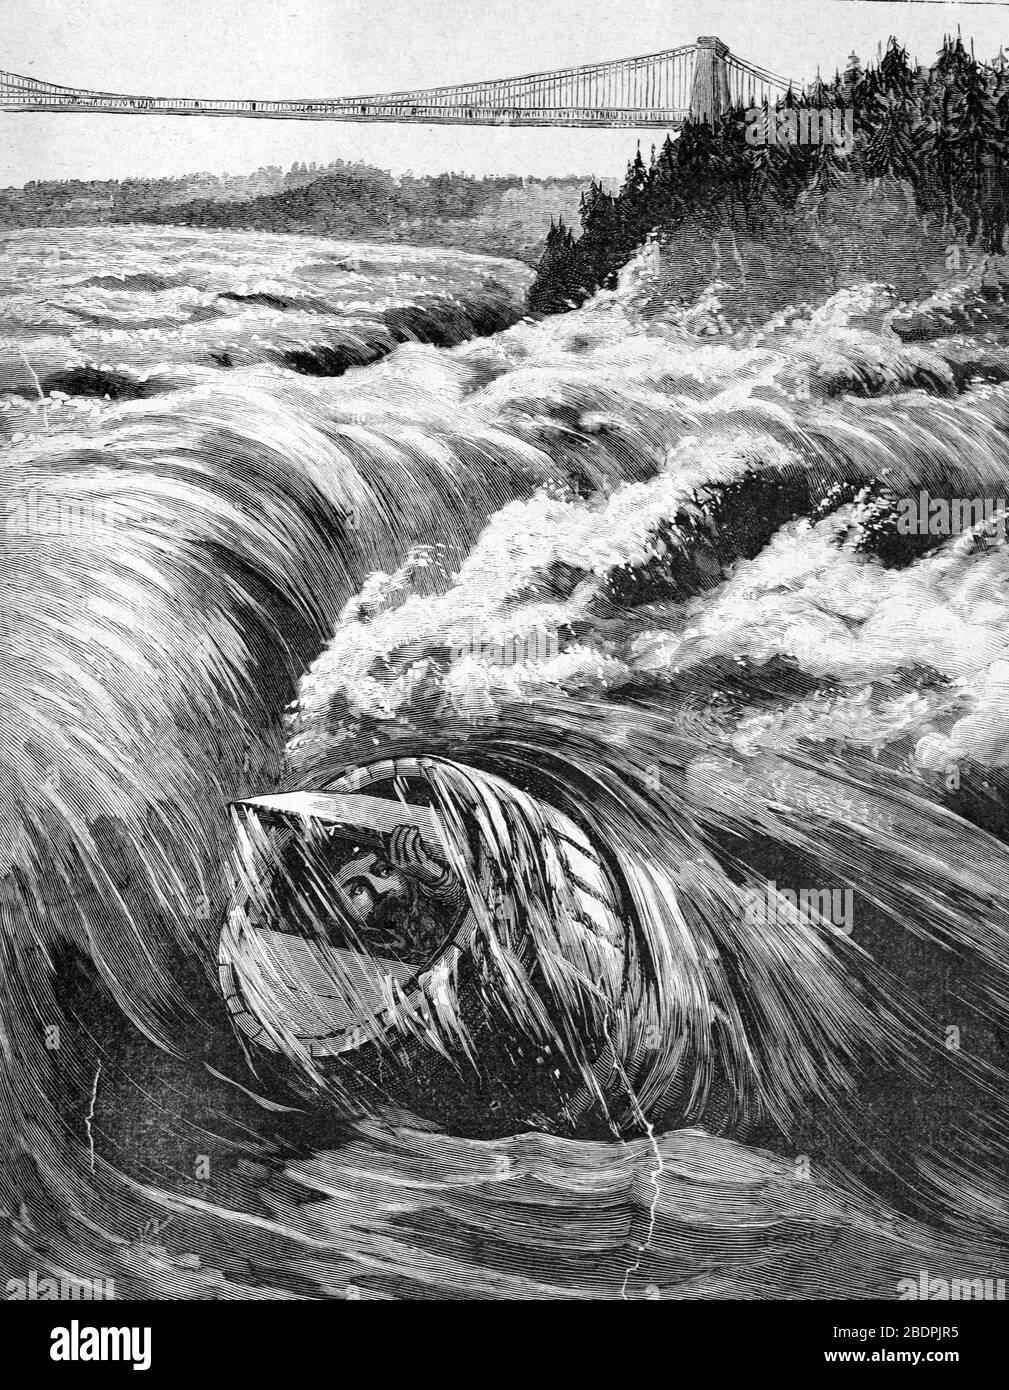 Carlisle Graham, the First Barrel Daredevil to Plunge over the Niagara Falls in a Barrel on 11th July 1886 on US-Canada Border. Vintage or Old Illustration or Engraving 1866 Stock Photo